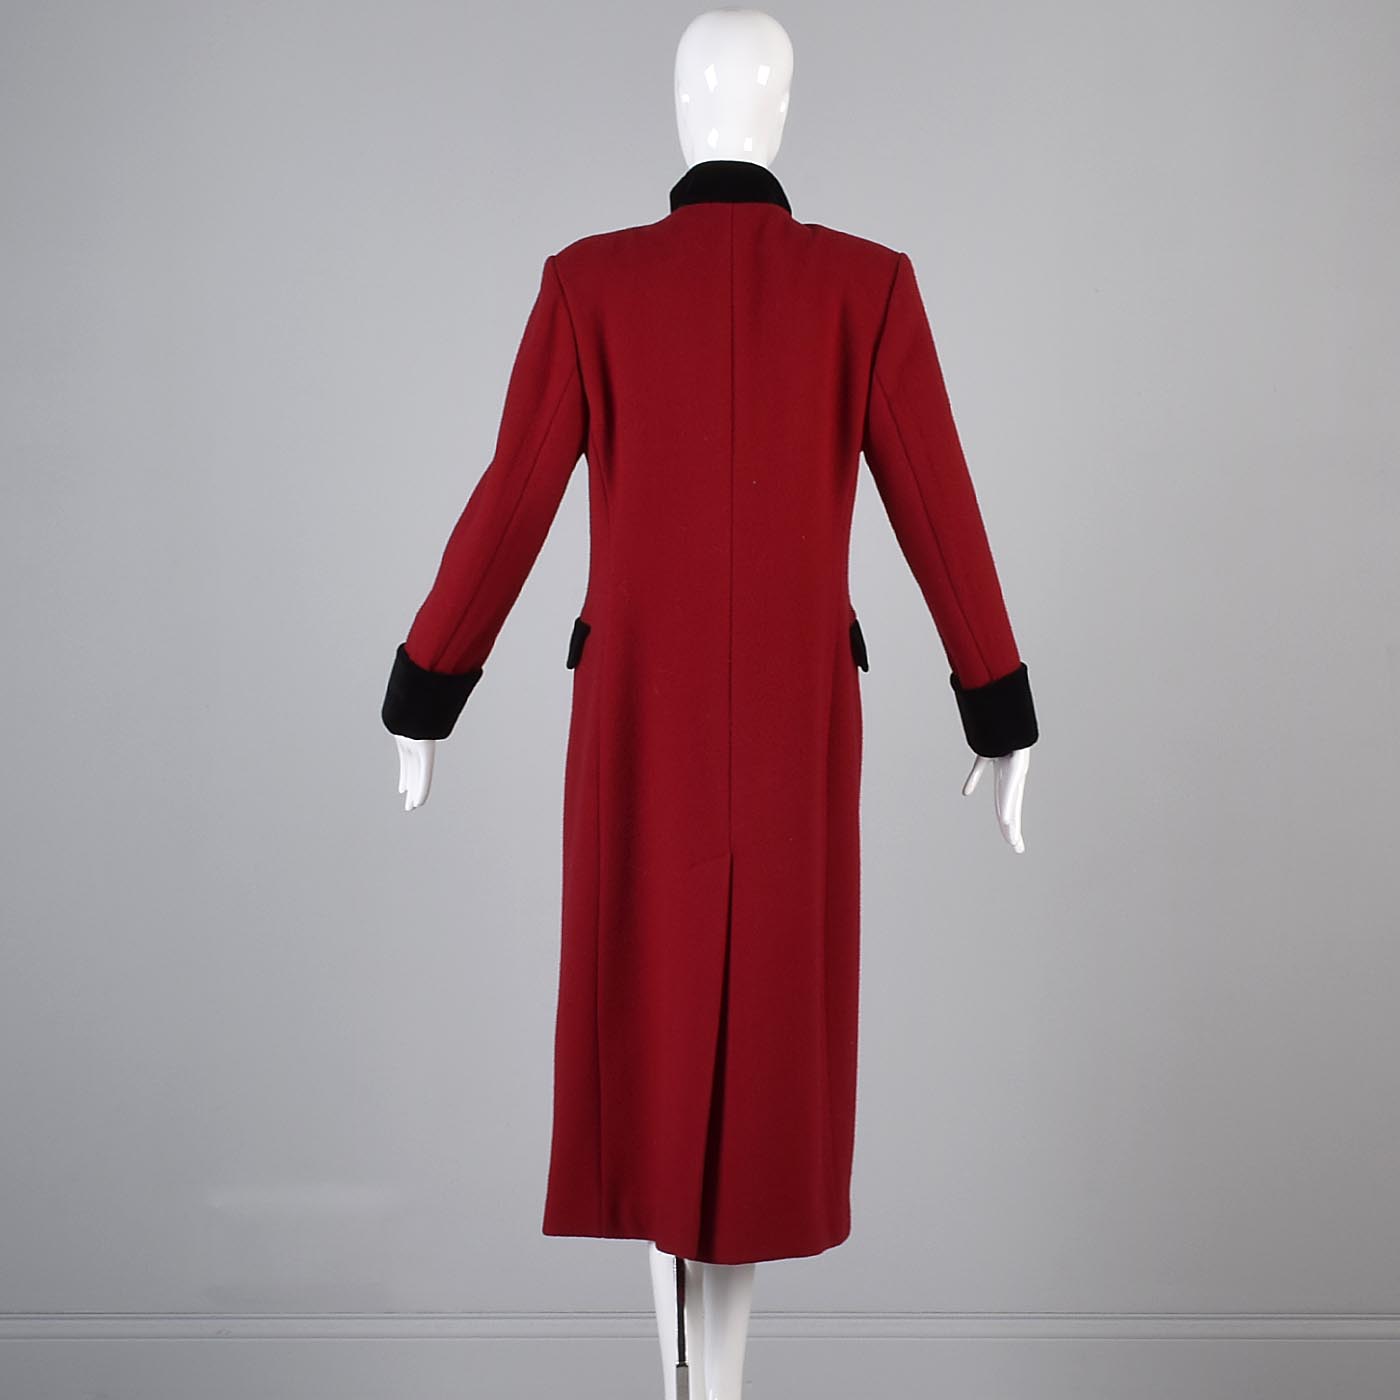 1980s Christian Dior Military Style Red Winter Coat